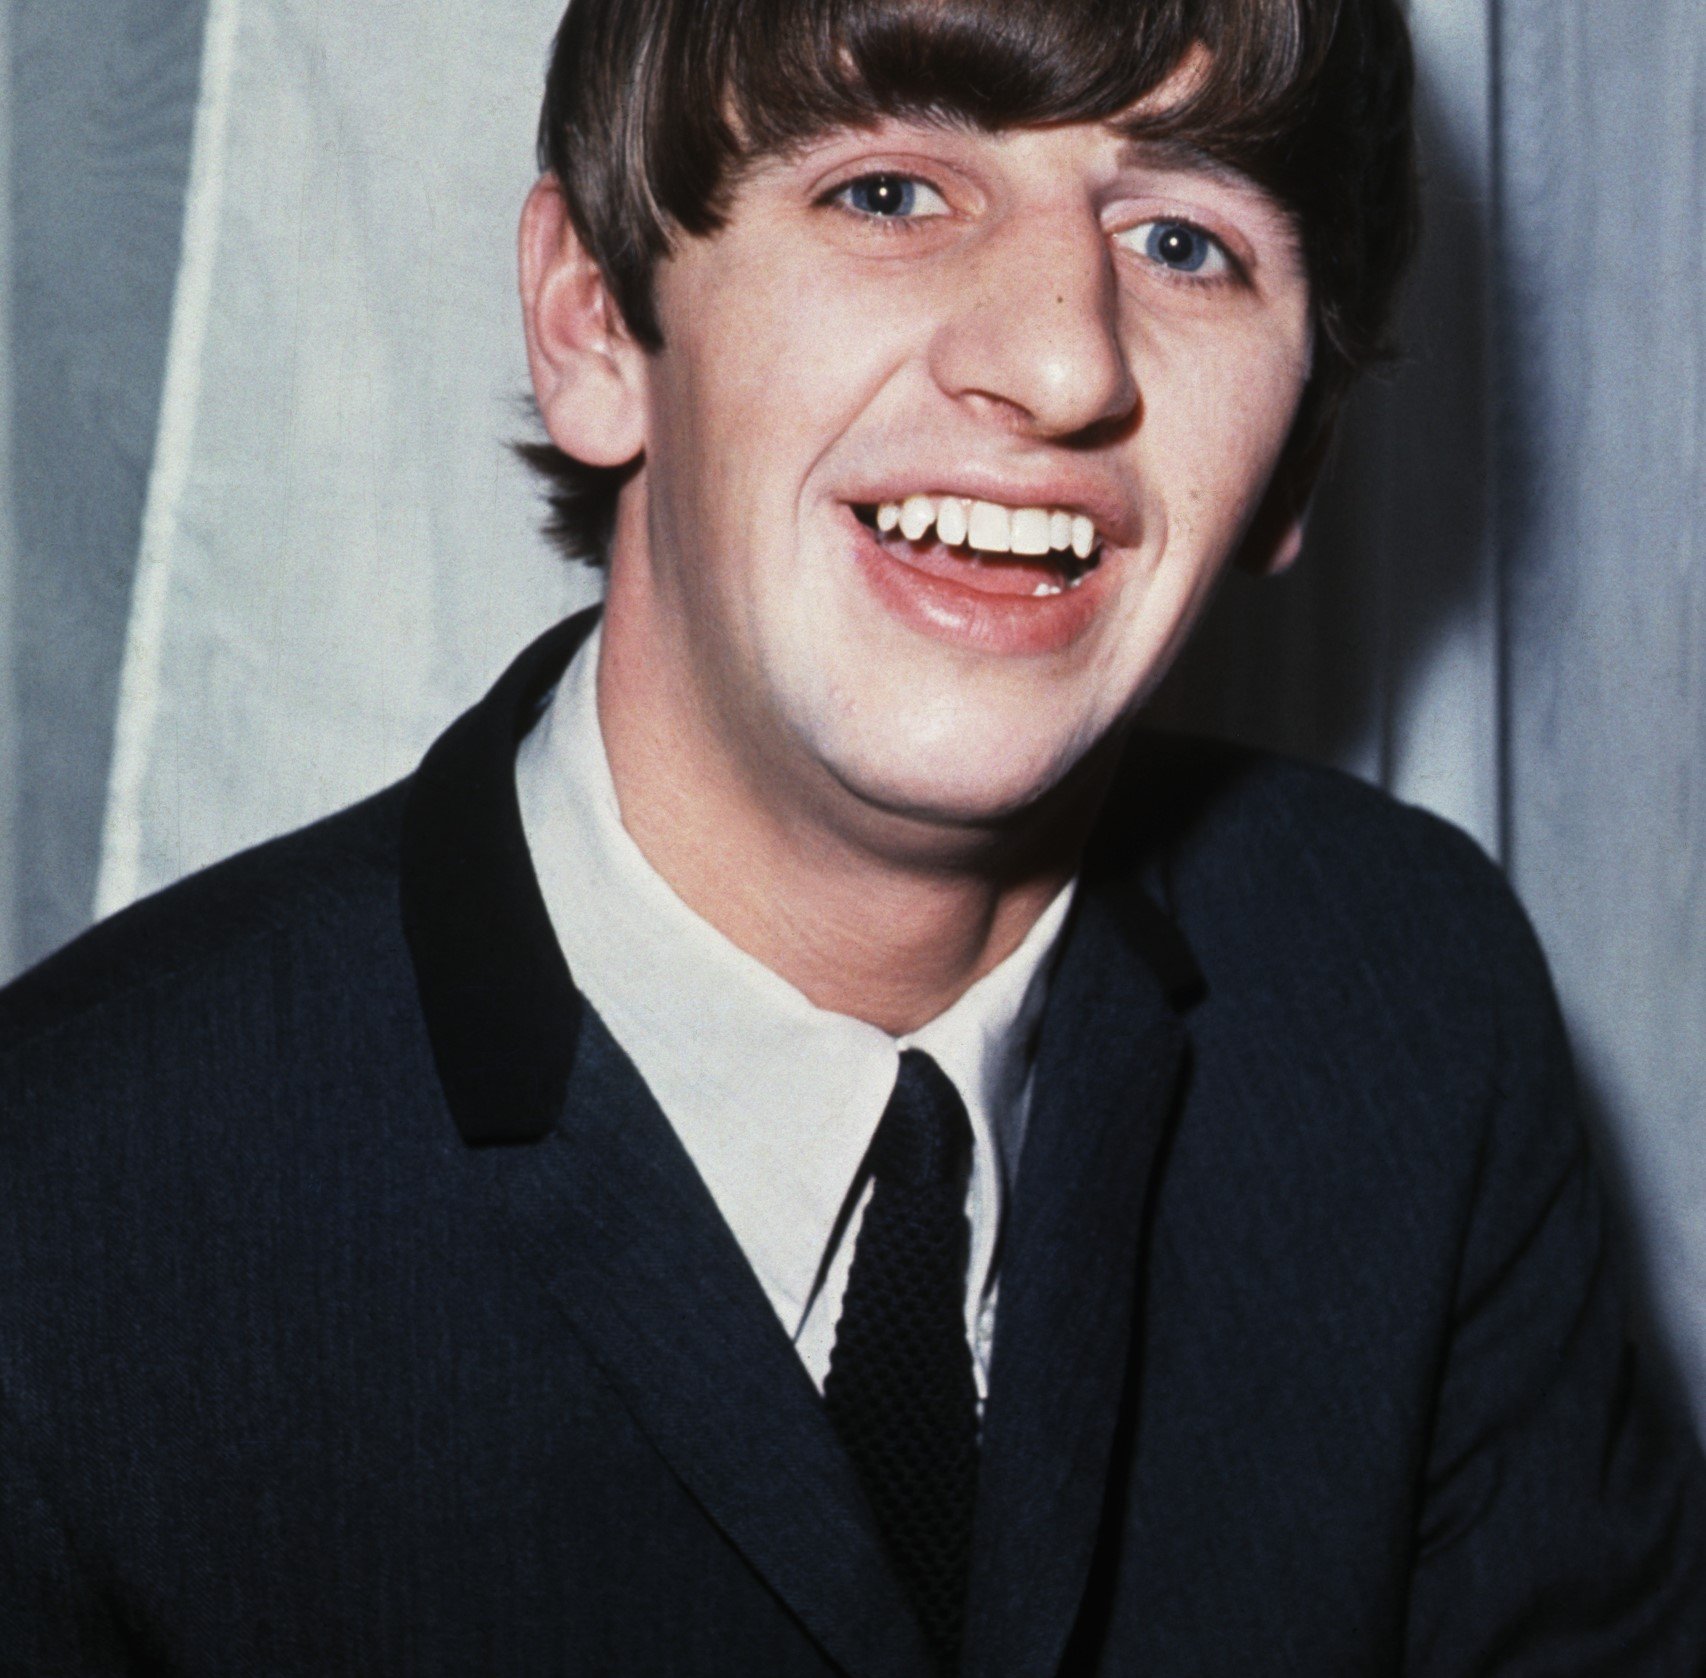 Ringo Starr Covered 1 of the Songs He Bought as a Kid After The Beatles  Broke Up